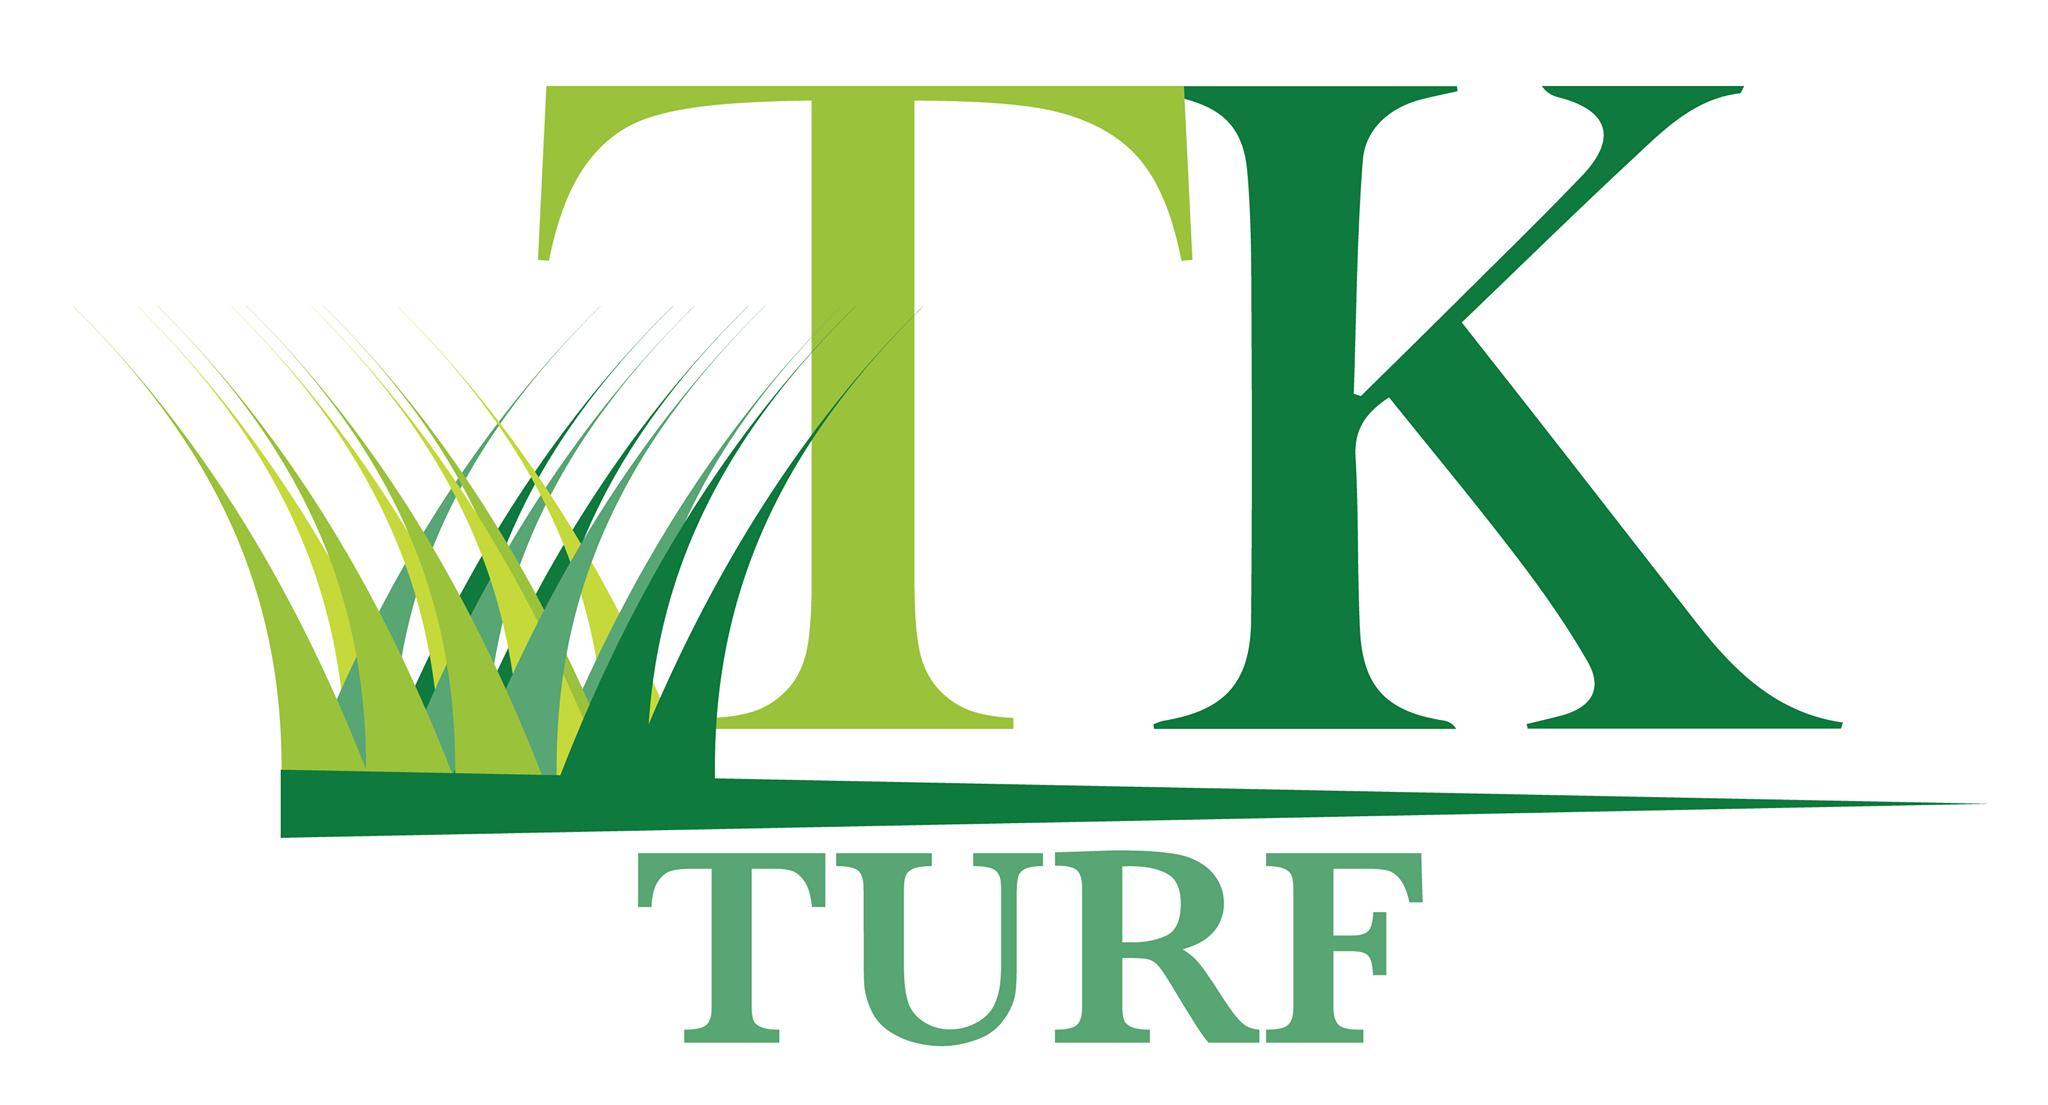 TK Turf | home goods store | 601 N Ashley Dr suite 1100, Tampa, FL 33602, United States | 8135344220 OR +61 (813) 534-4220